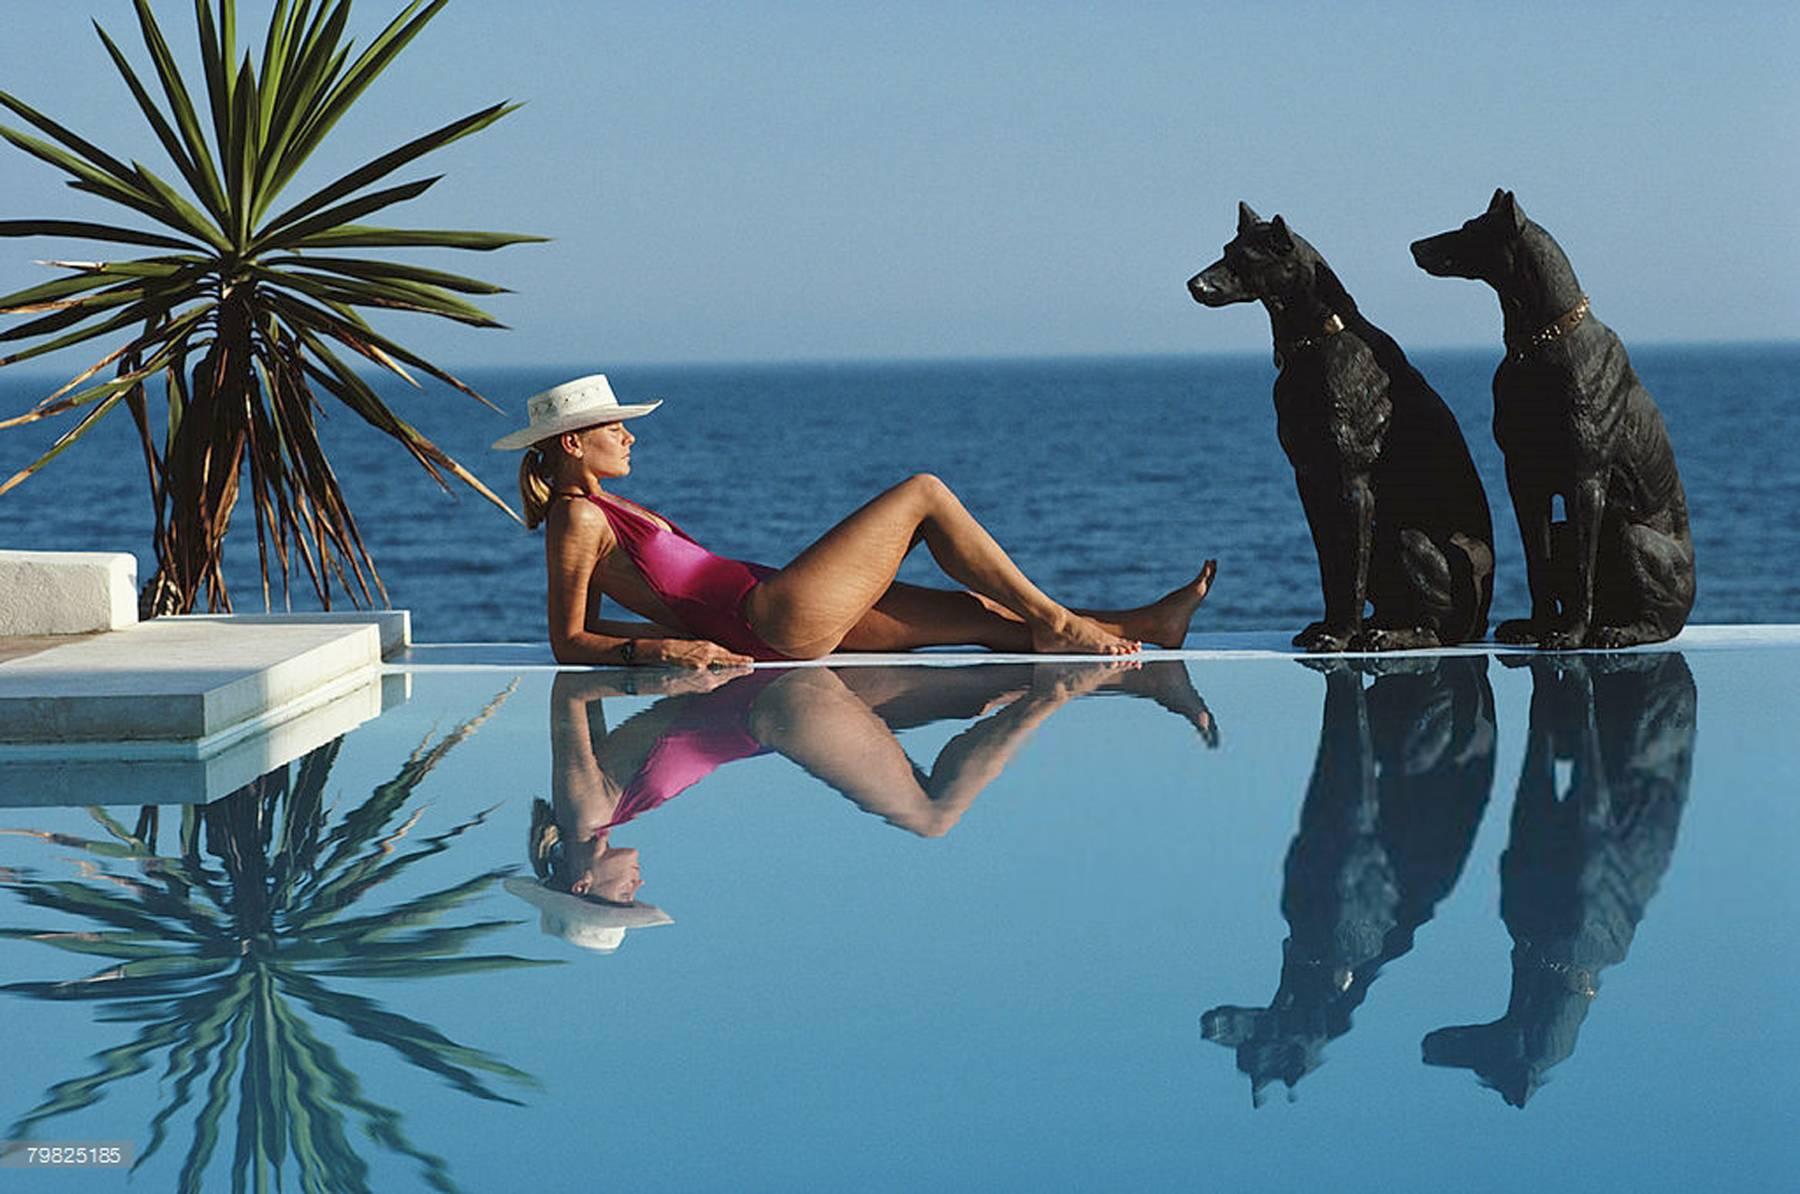 Laura Hawk, assistant to the Slim Aarons, relaxes by the pool at El Rincon, the von Pantz' Marbella home, September 1st, 1985.

Marbella Pool
Slim Aarons Estate Edition
40 x 60 inches

Aarons was known for catching moments that appear effortless,